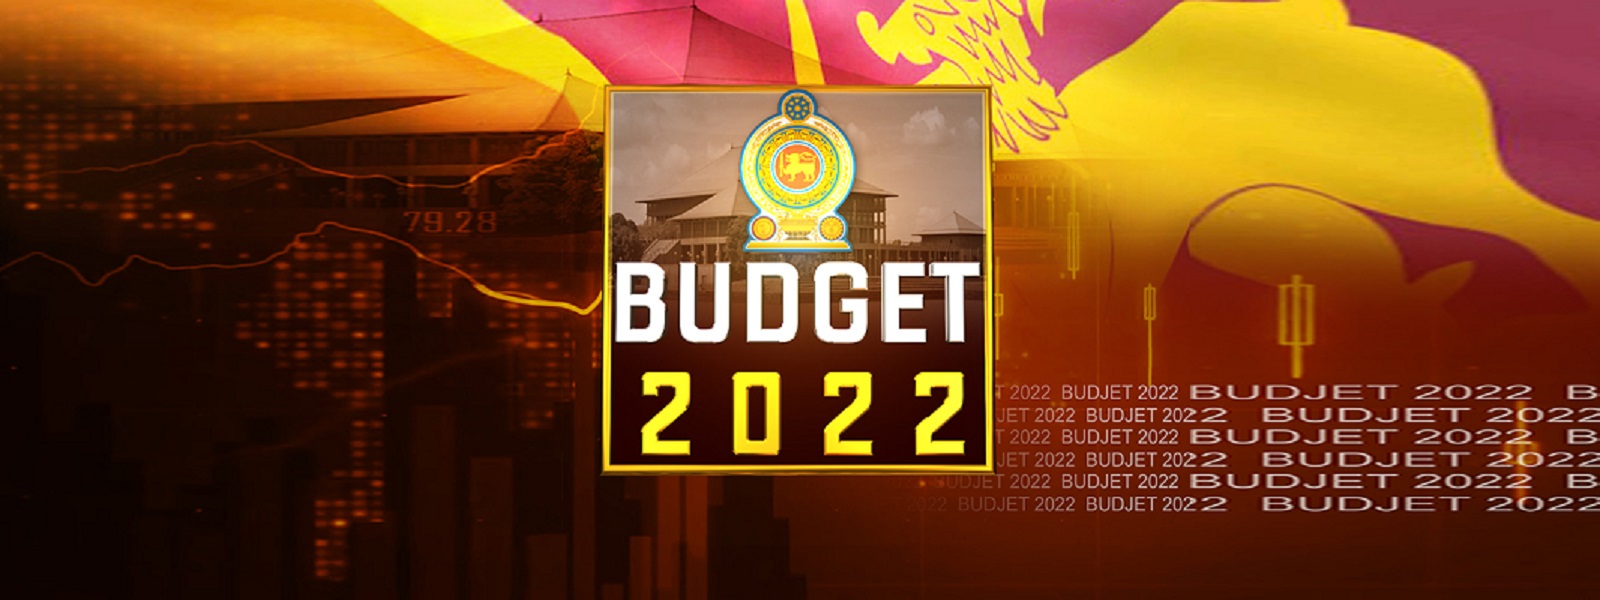 Cabinet approves supplementary budget of Rs. 695 Bn